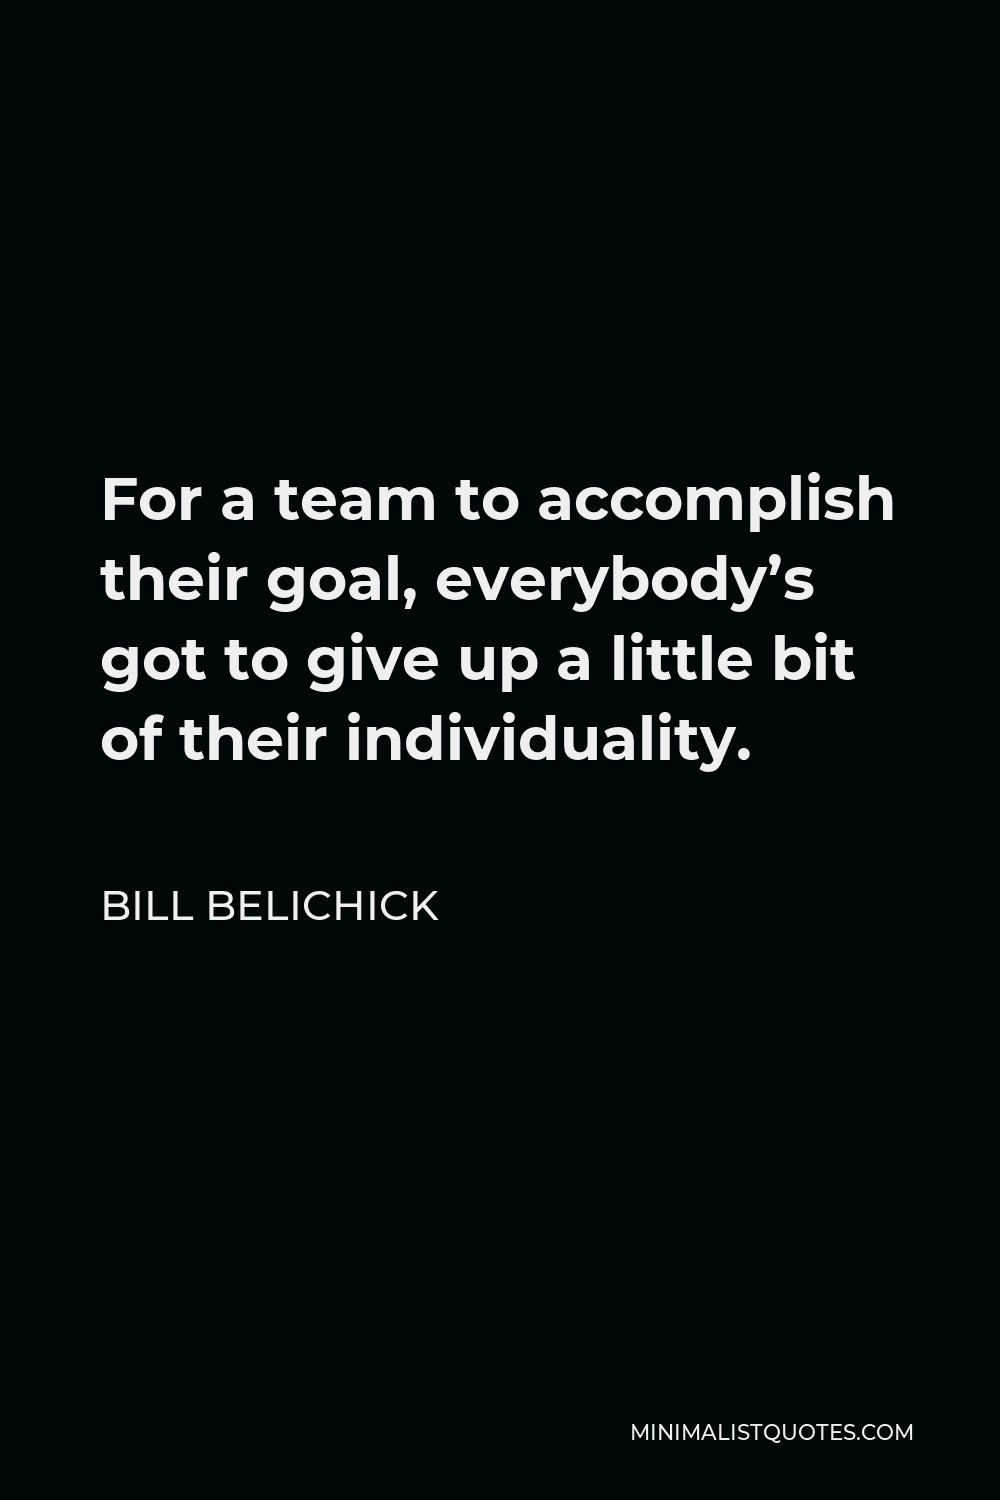 Bill Belichick Quote - For a team to accomplish their goal, everybody’s got to give up a little bit of their individuality.